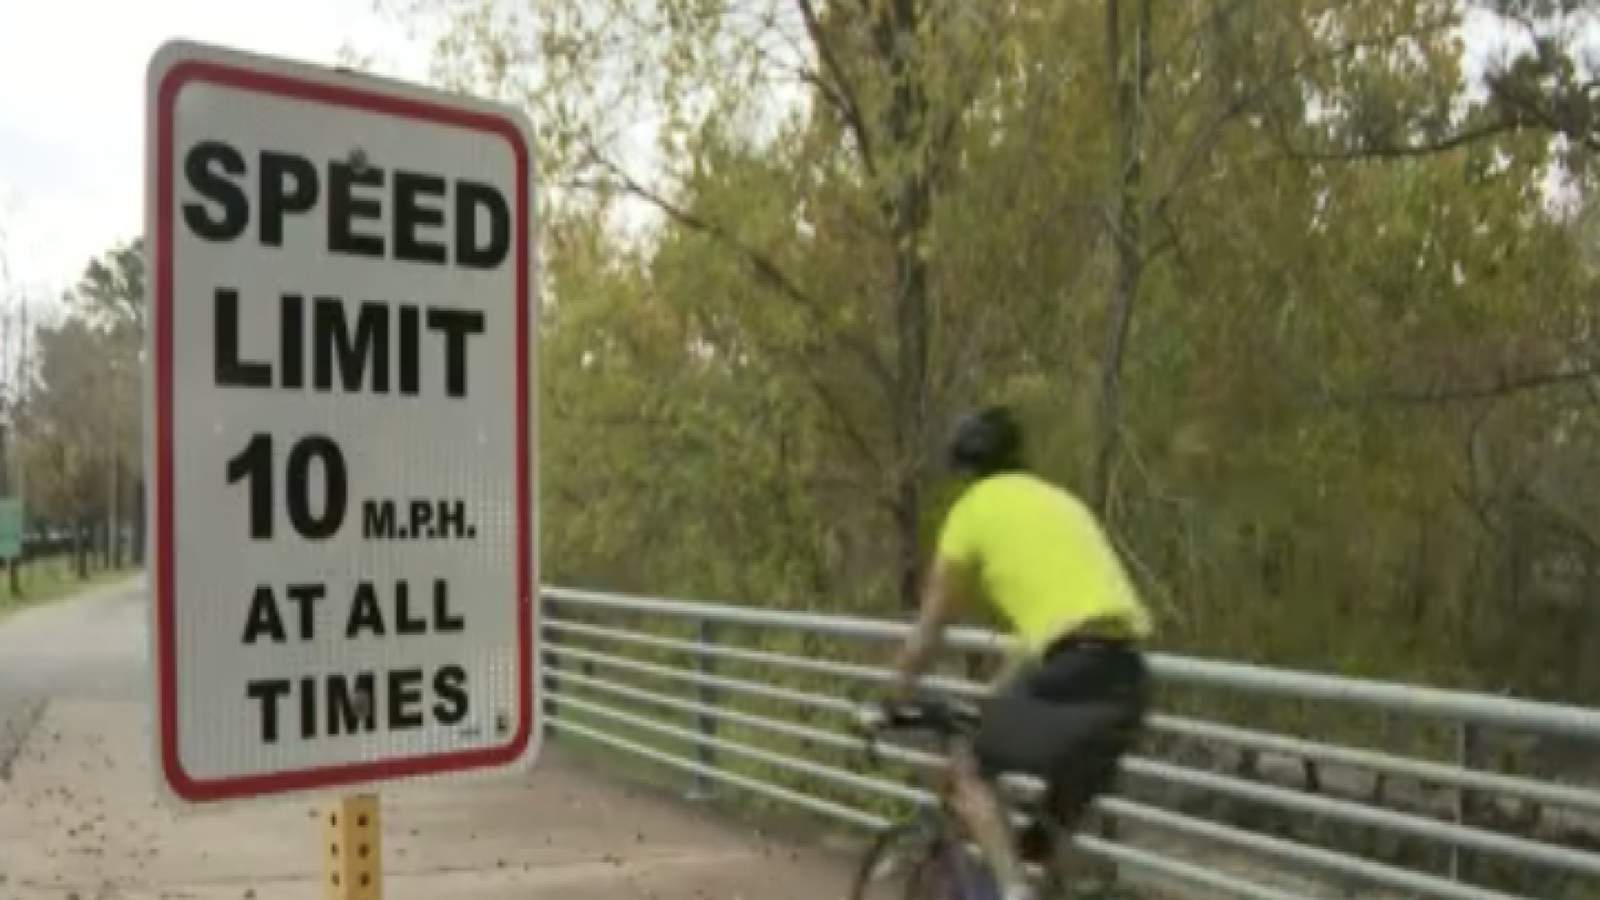 New speed limit put in place for cyclists at some Houston parks